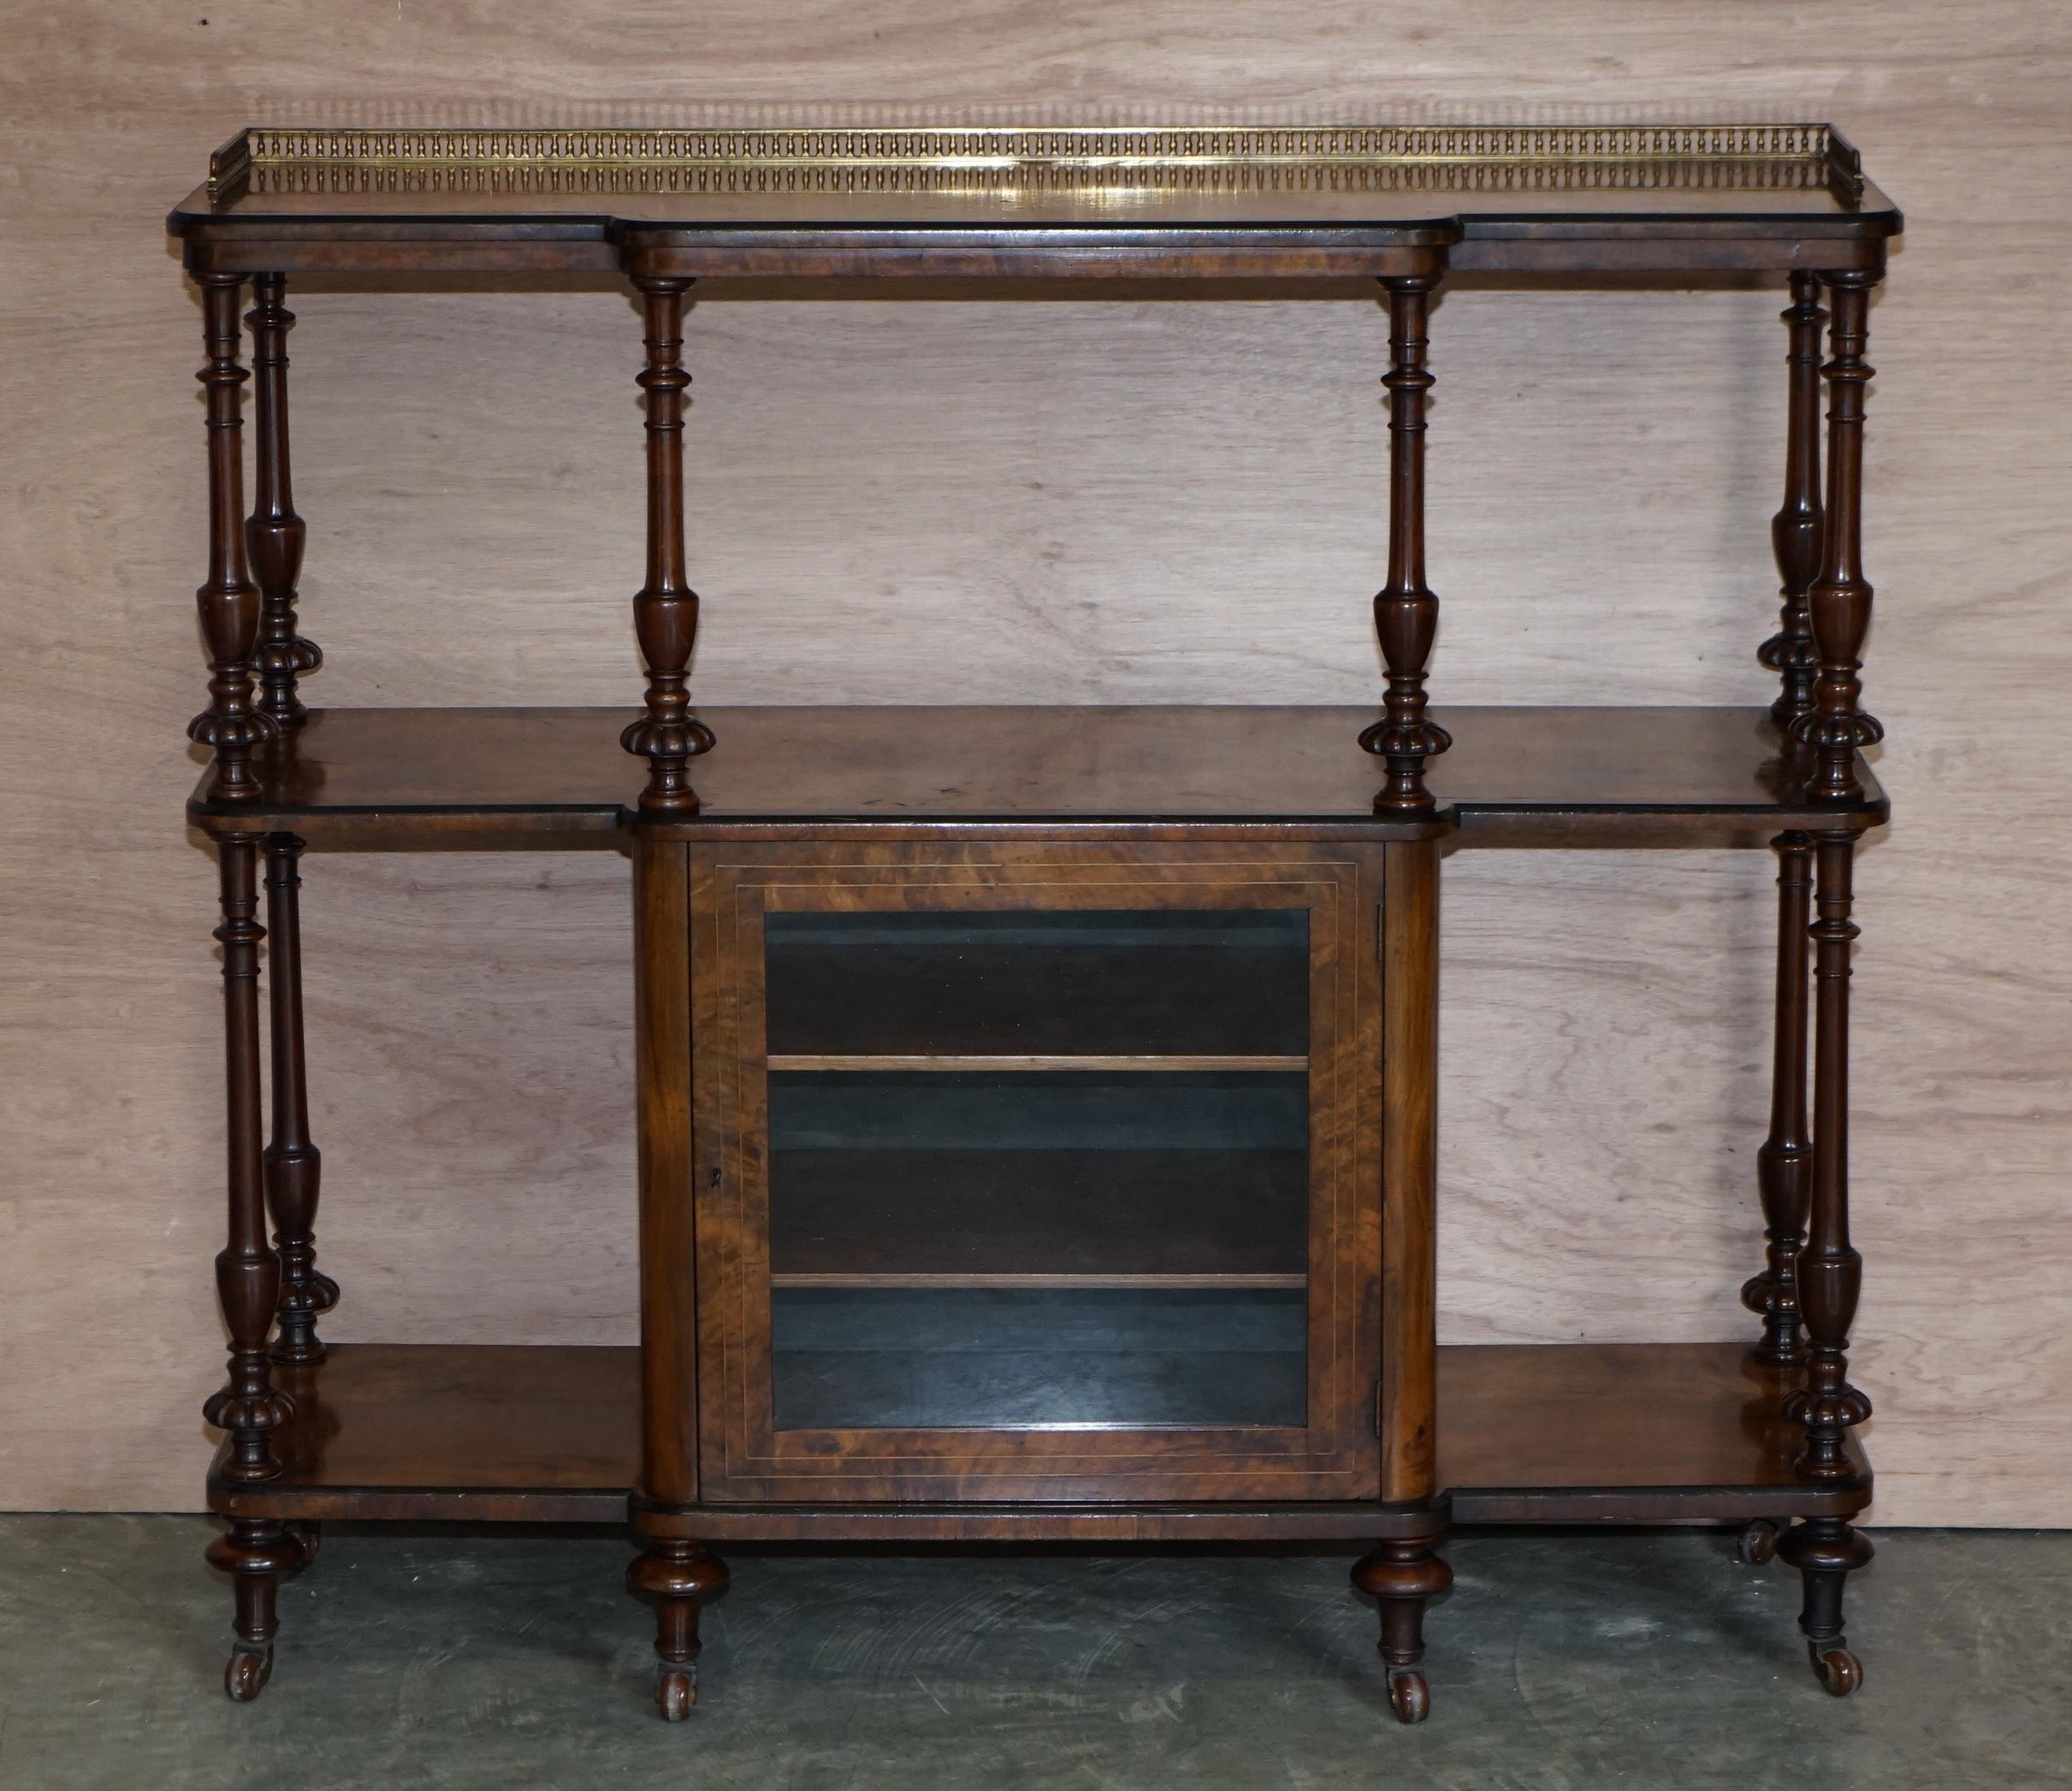 We are delighted to offer this very fine circa 1880 Burr walnut with Marquetry inlay, brass gallery rail and original porcelain castors, open library bookcase Etagere

A very decorative and well made piece, there is so much to see with this piece